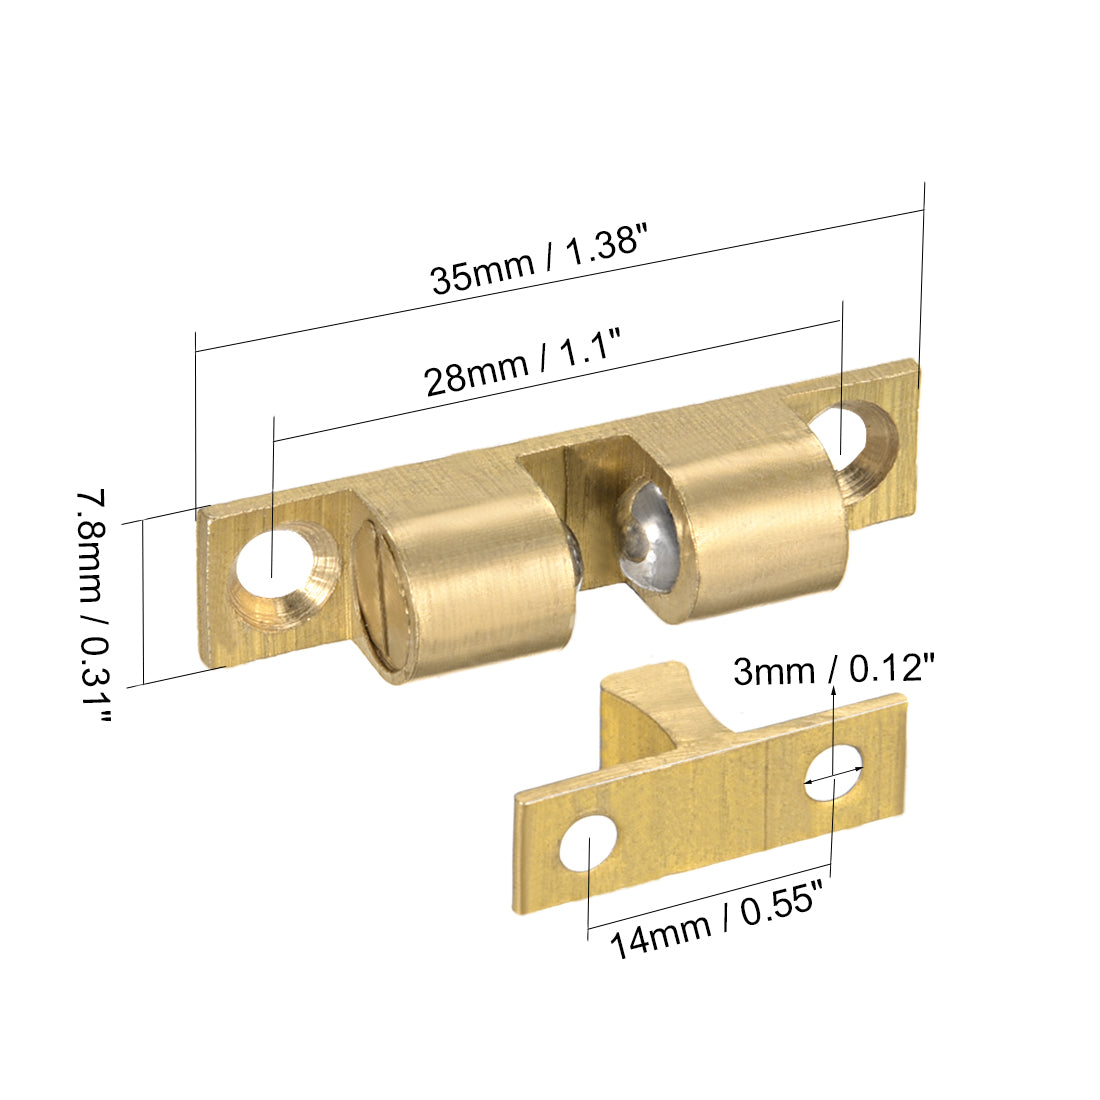 uxcell Uxcell Cabinet Door Closet Brass Double Ball Catch Tension Latch 35mm Length Gold Tone 2pcs